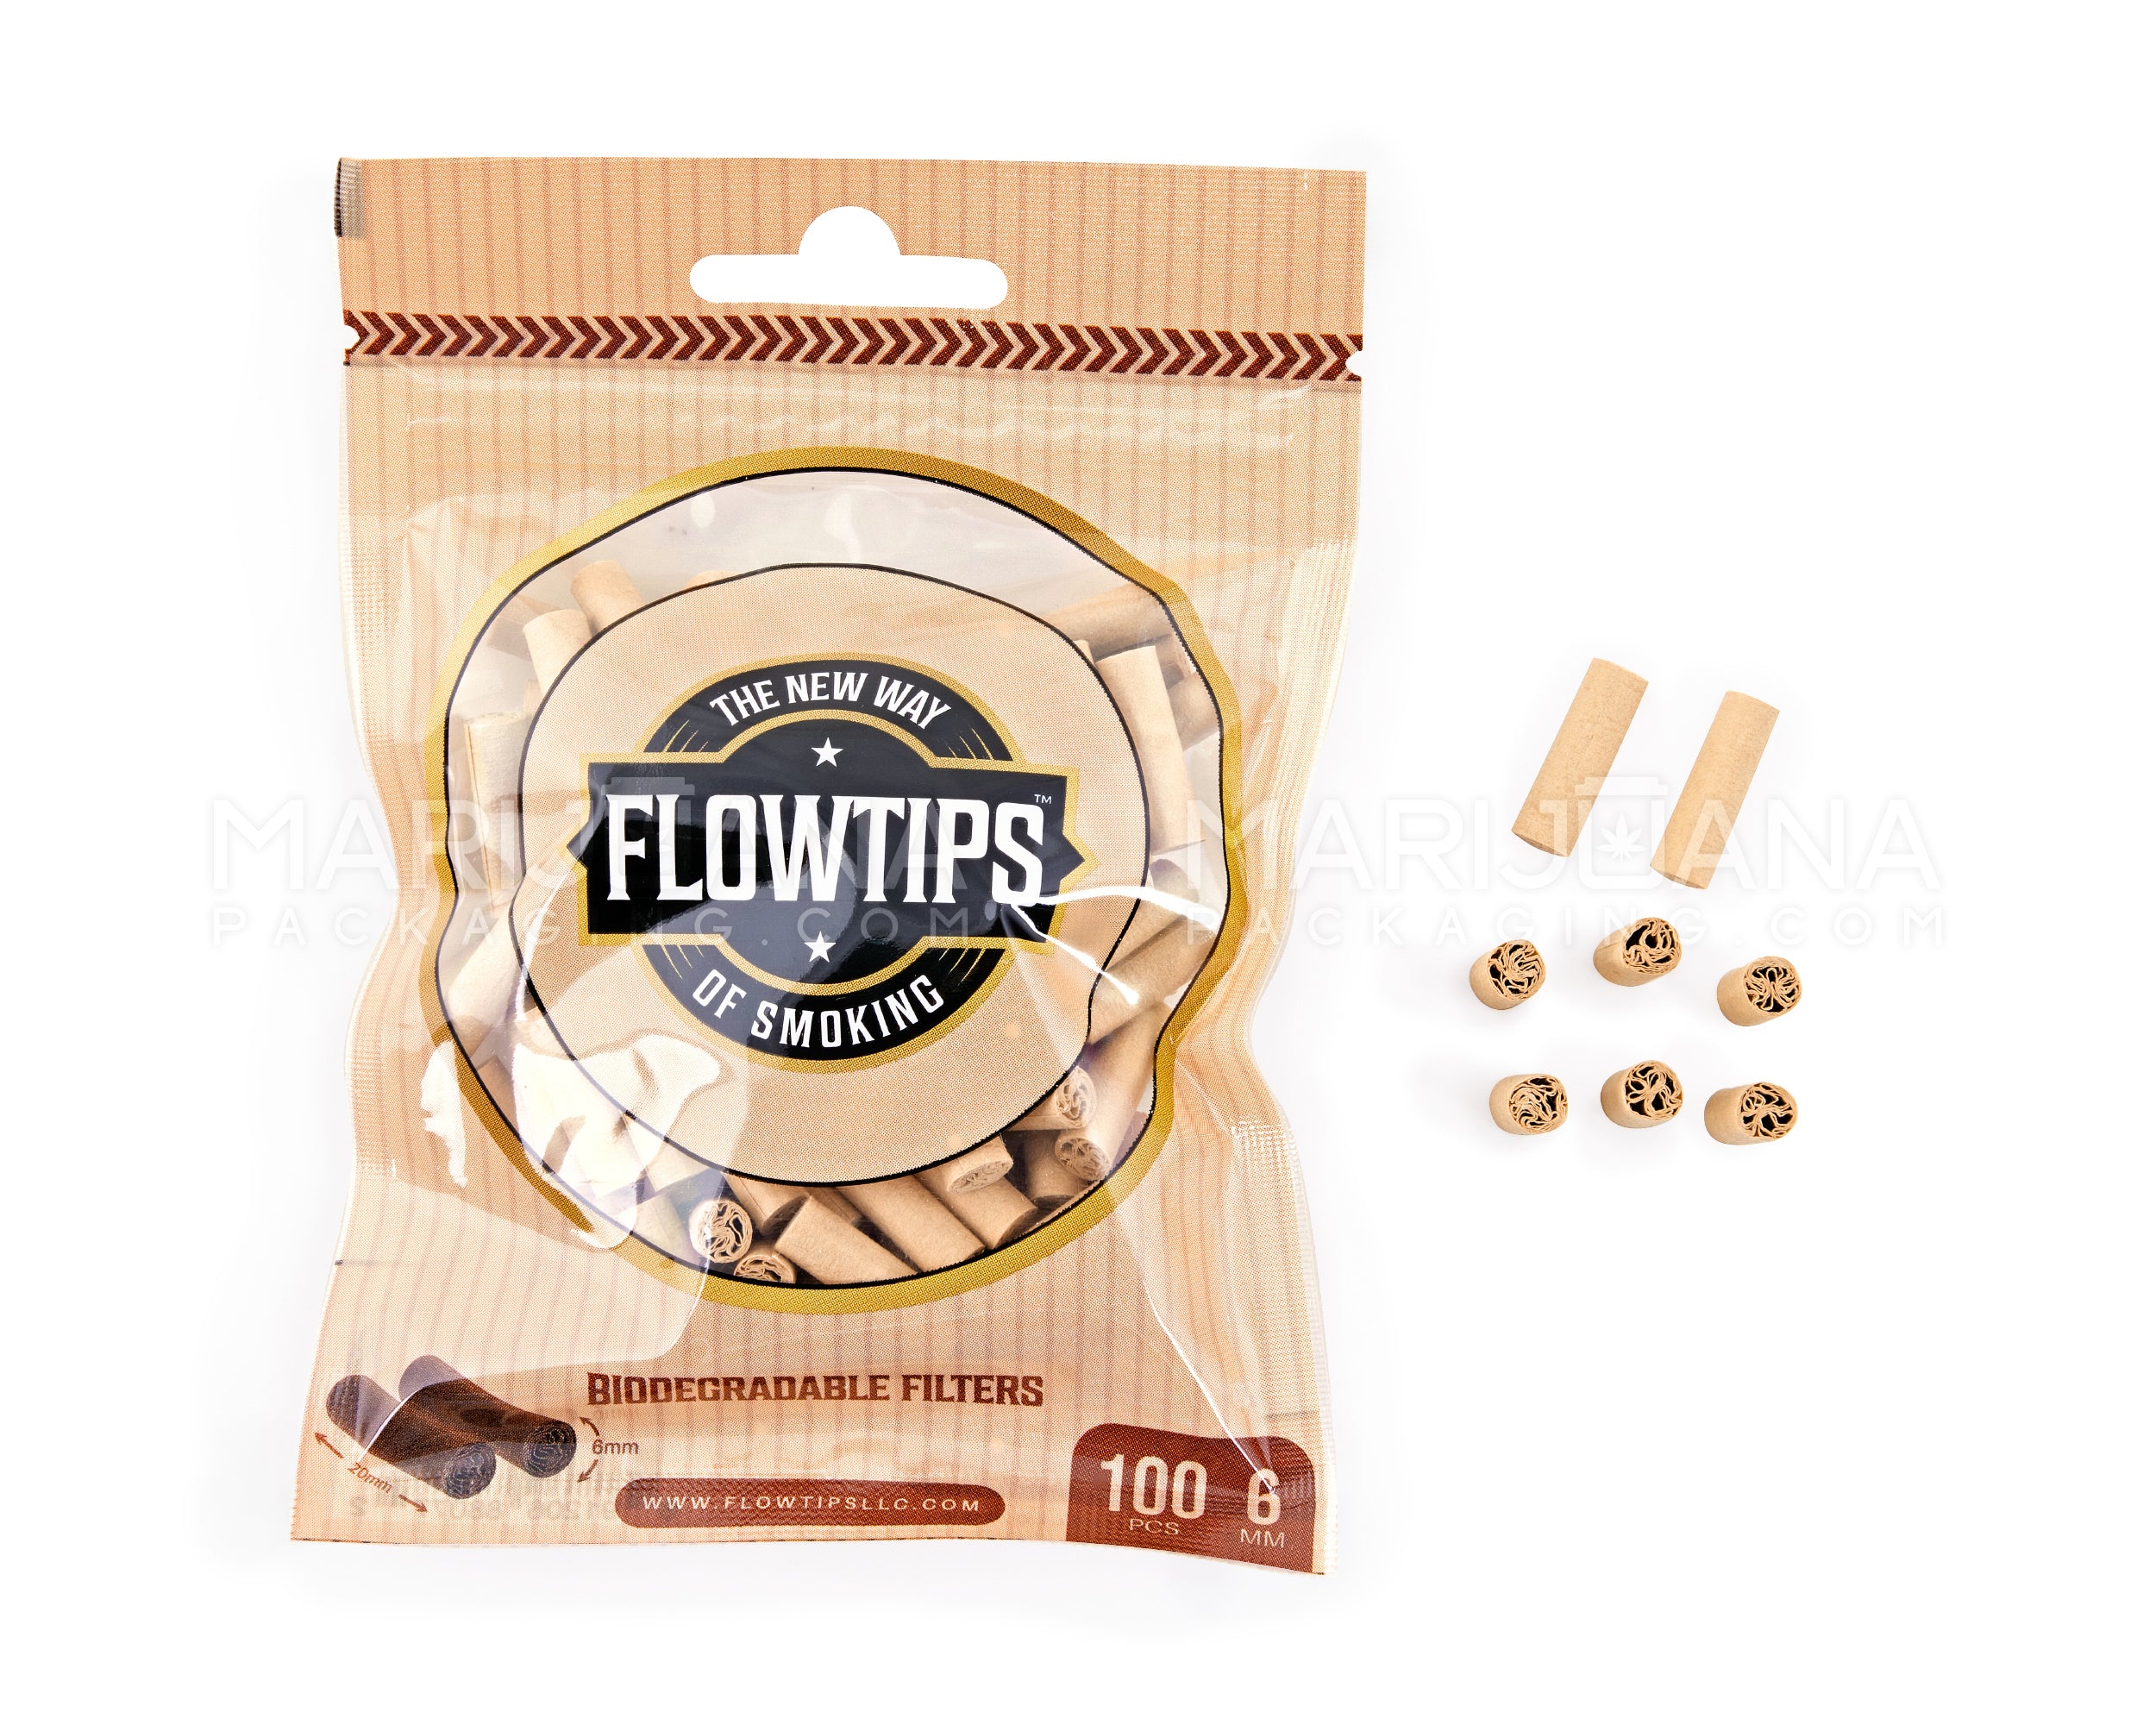 FLOWTIPS | 'Retail Display' Biodegradable Filter Tips | 20mm - Unbleached Bio Paper - 10 Count